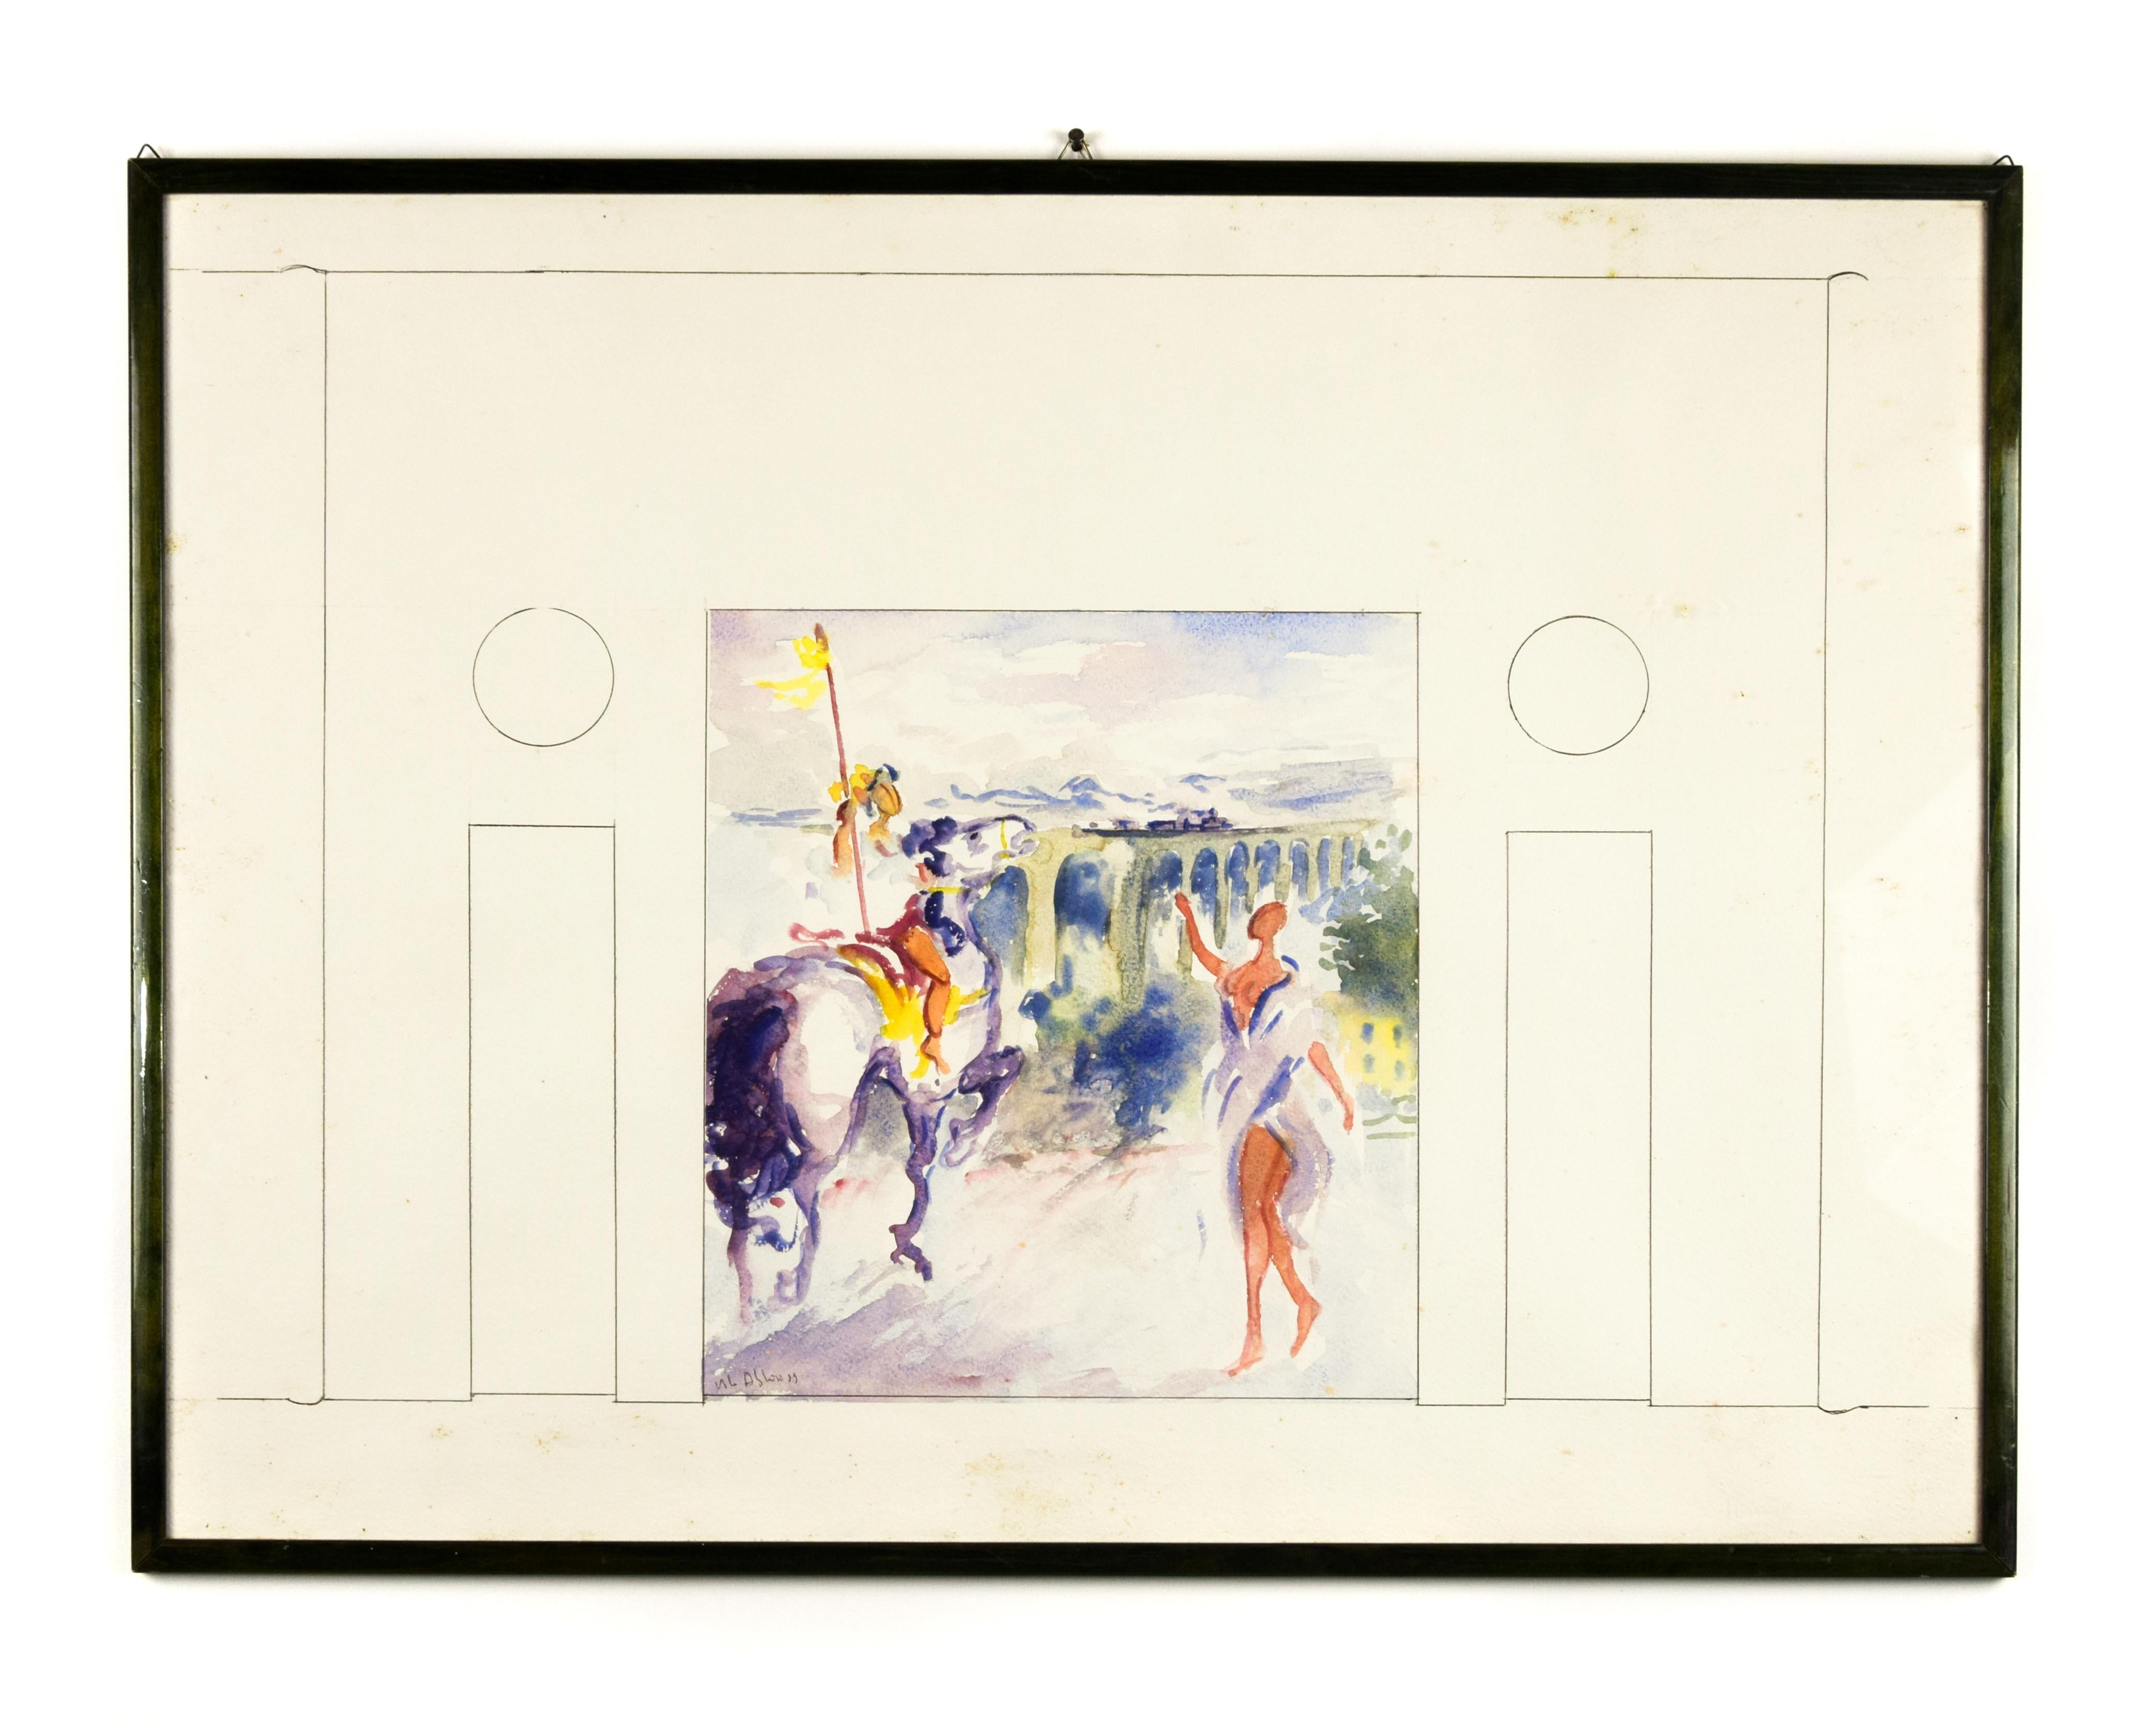 Knight and Girl is an original lithograph realized by Vito Alghisi in 1999.

Watercolor on Paper. Good conditions,.

Includes a contemporary black wooden frame: 59 x 1.5 x 78 cm

Signed and dated in the bottom by the artist. 

The artist Vittorio